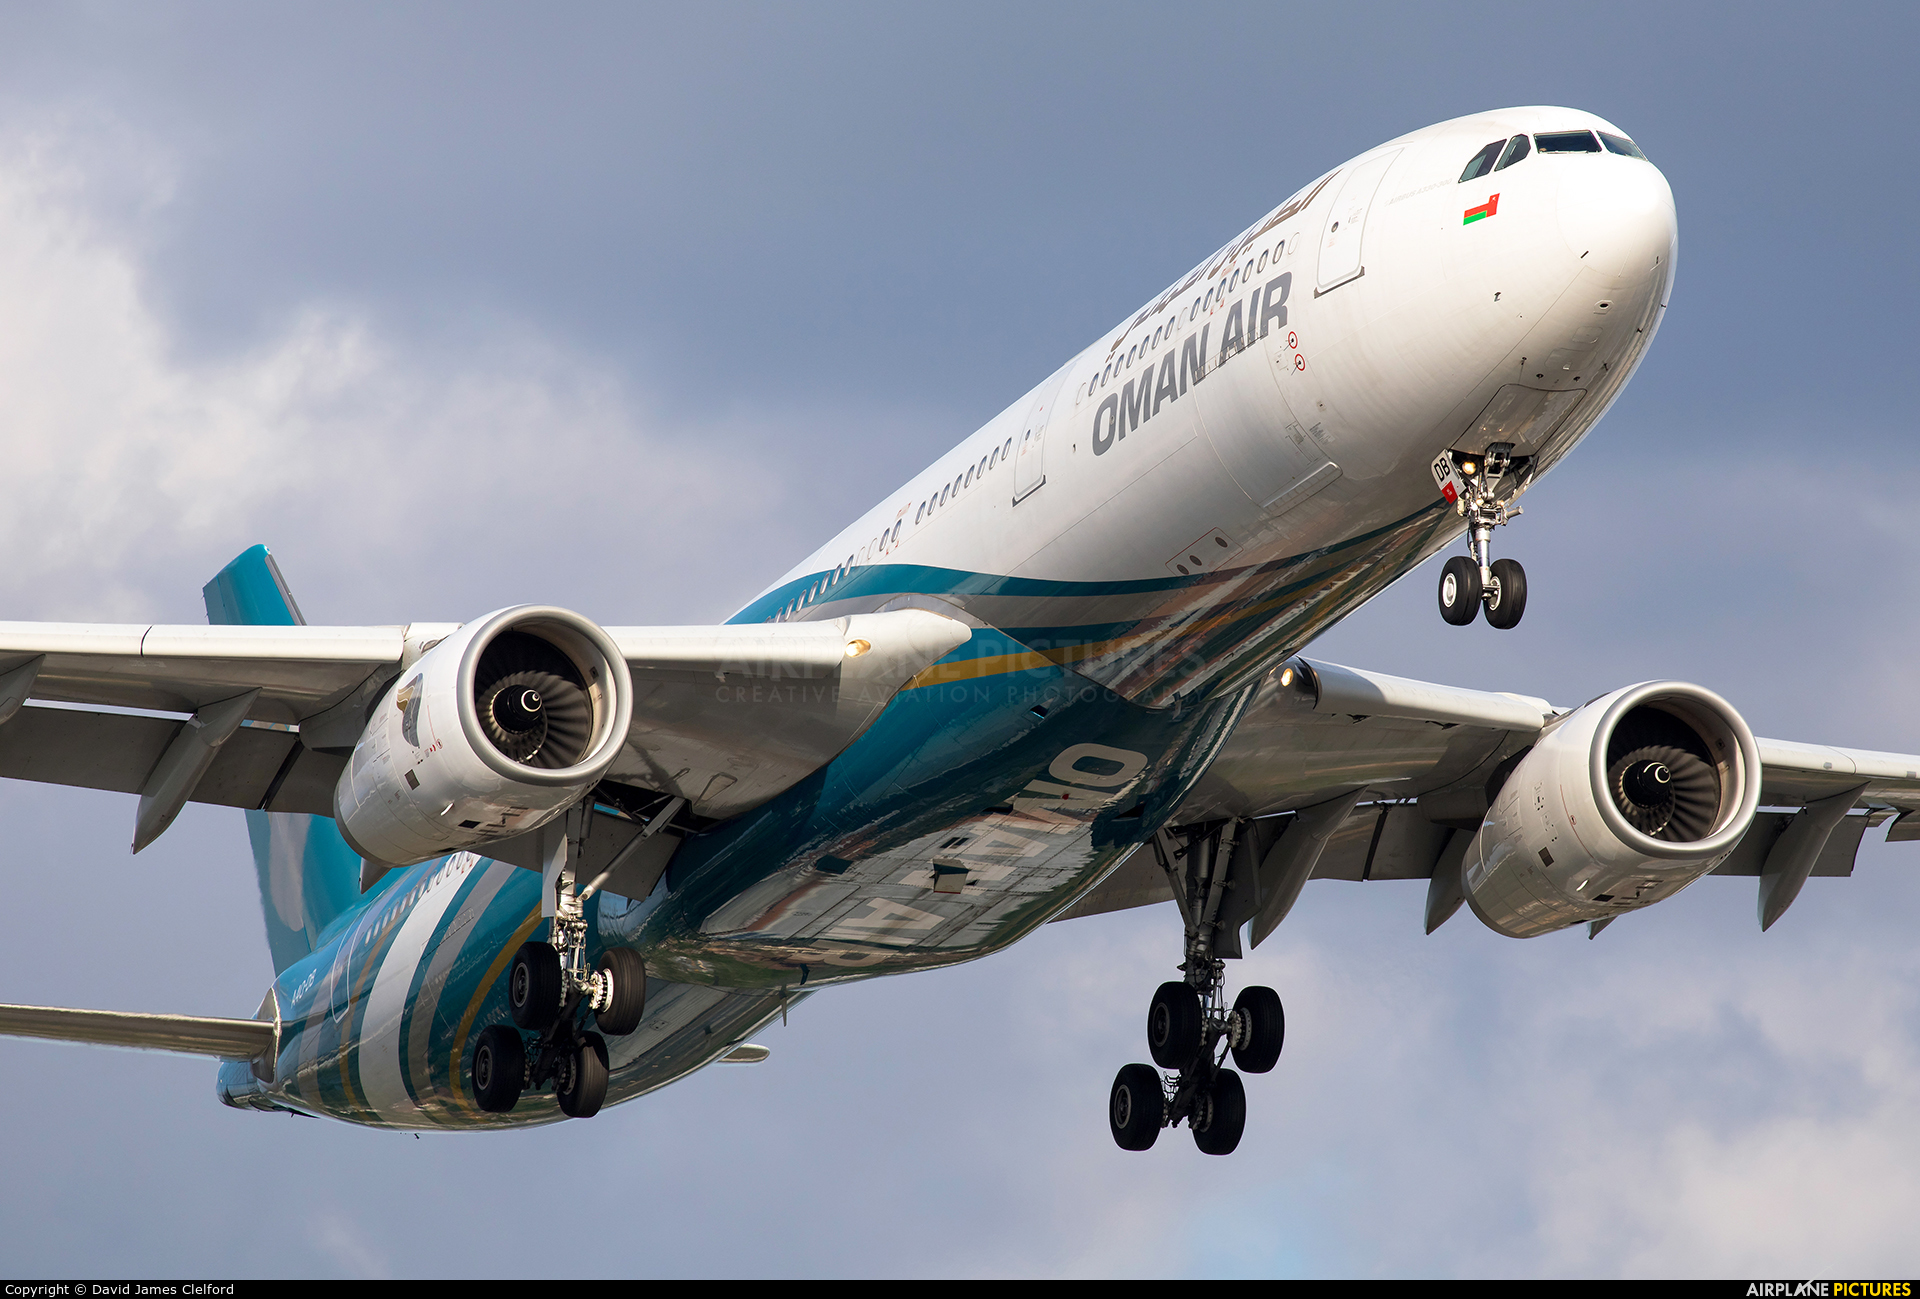 Oman Air operates cargo-only flights for Ministry of Health